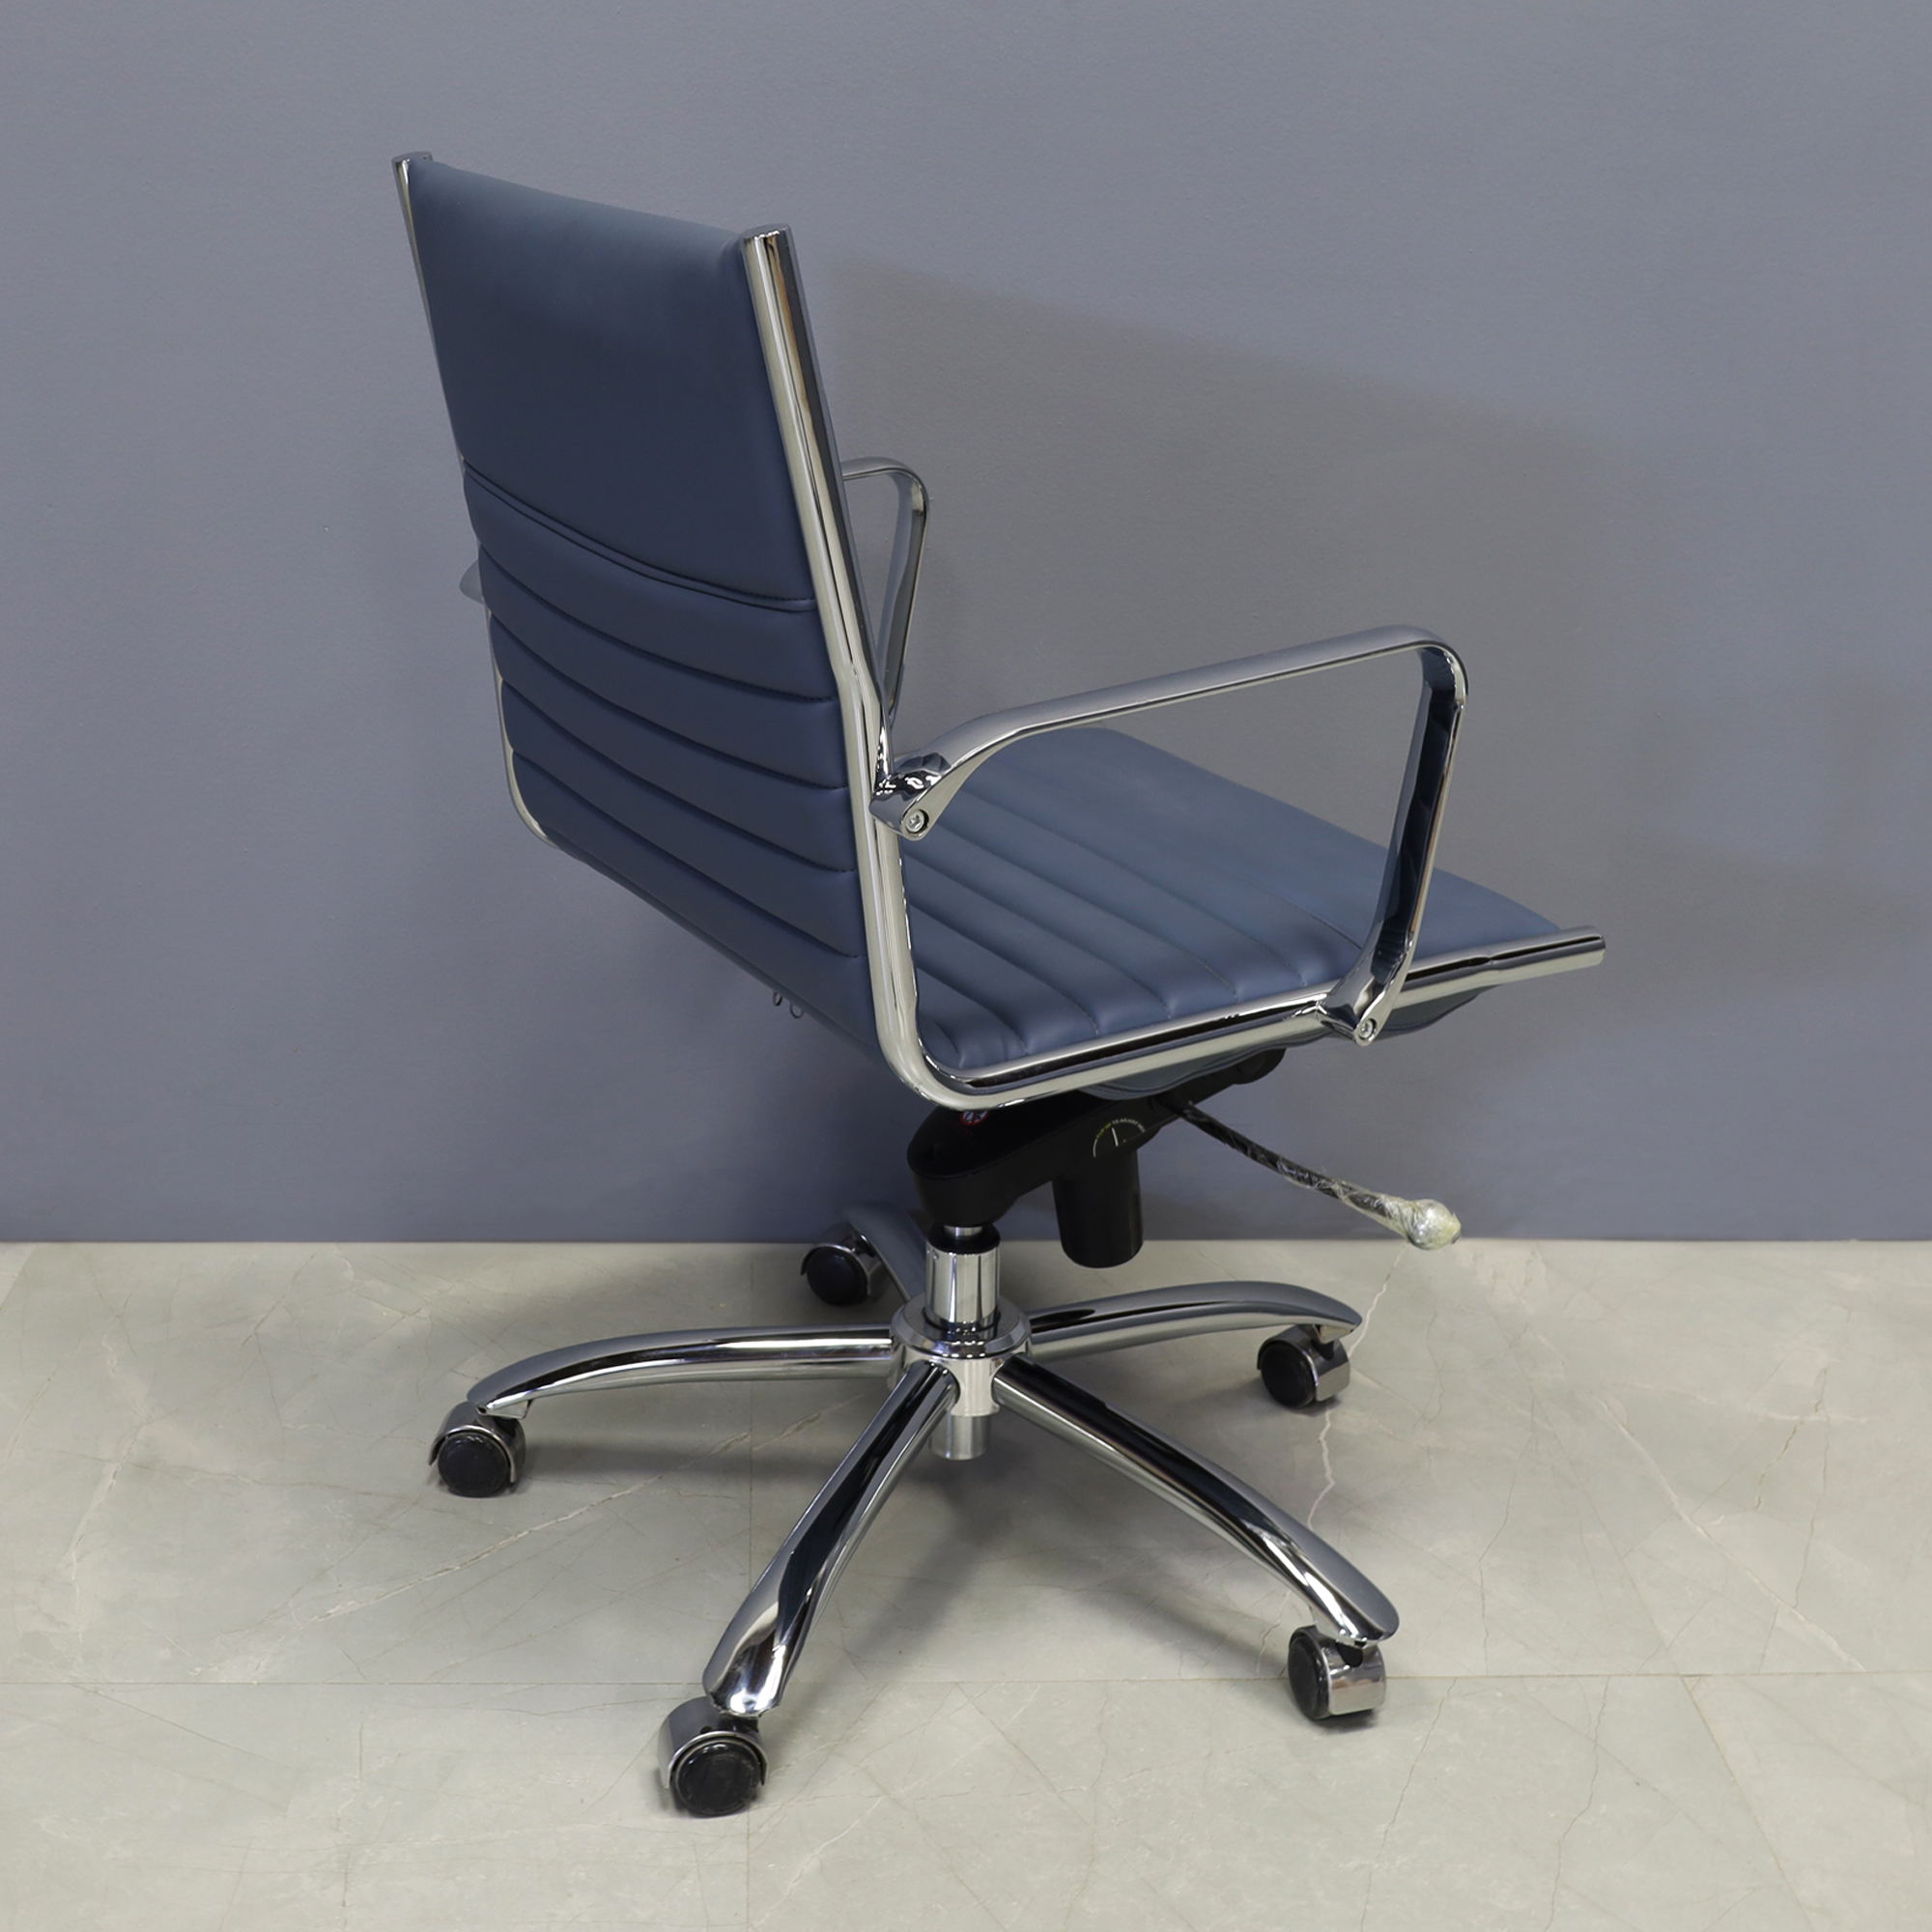 Dirk Low Back Office Chair in Blue Leatherette, shown here.